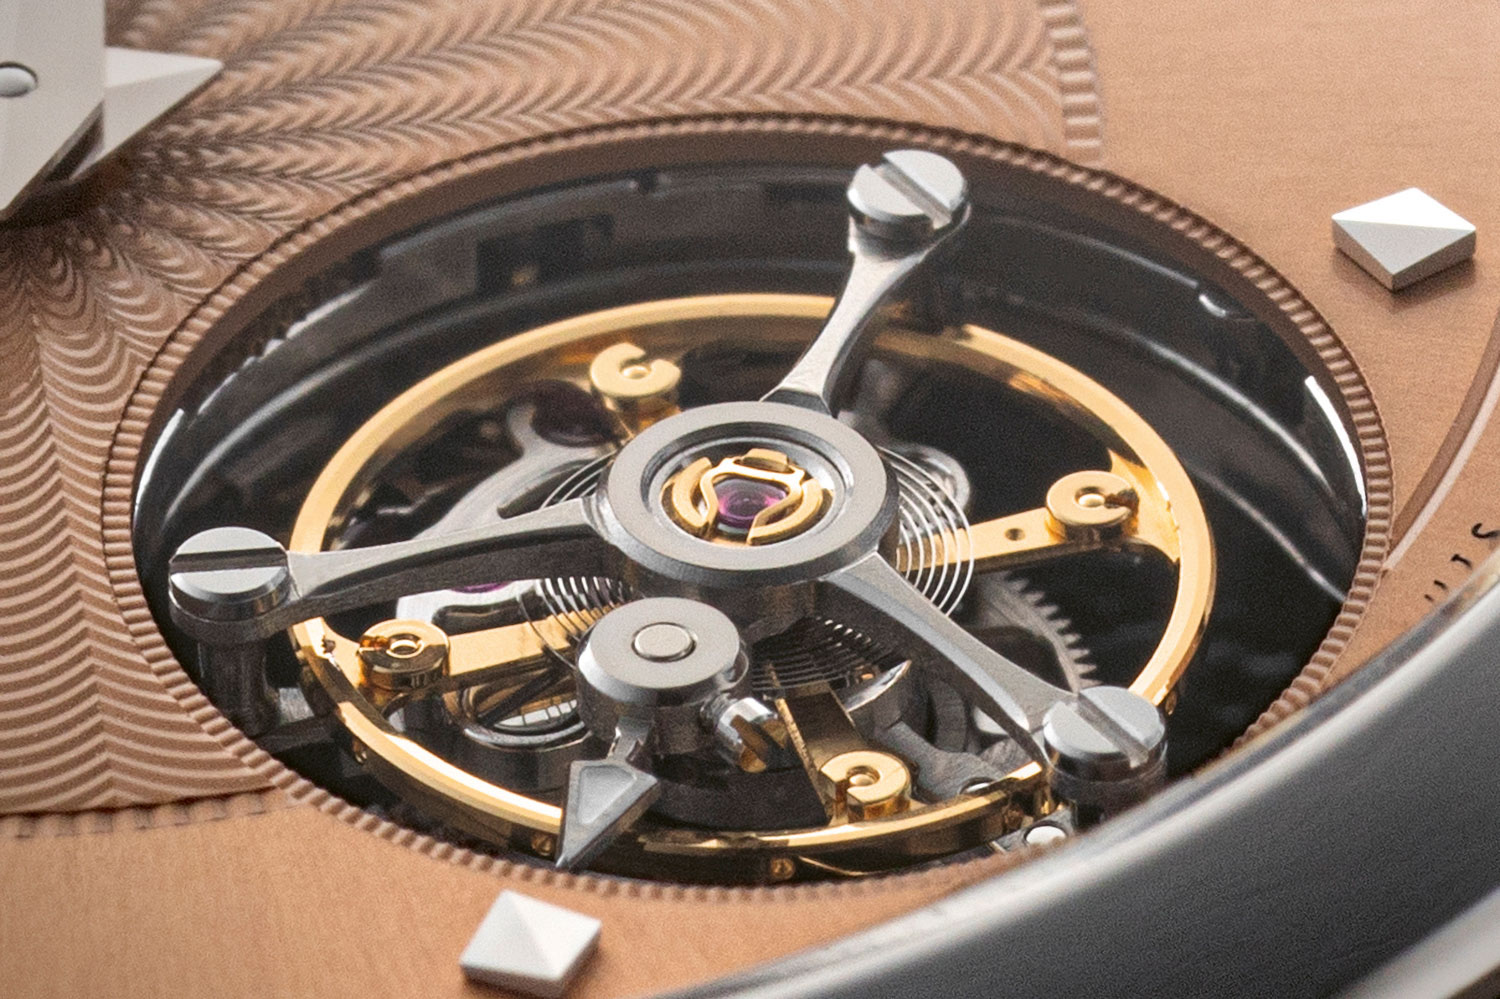 White triangle-shaped small seconds hand affixed to the flying tourbillon carriage crucial for COSC certification; notice also the 60 notches around the rim of tourbillon aperture serving as a seconds scale (©Revolution)